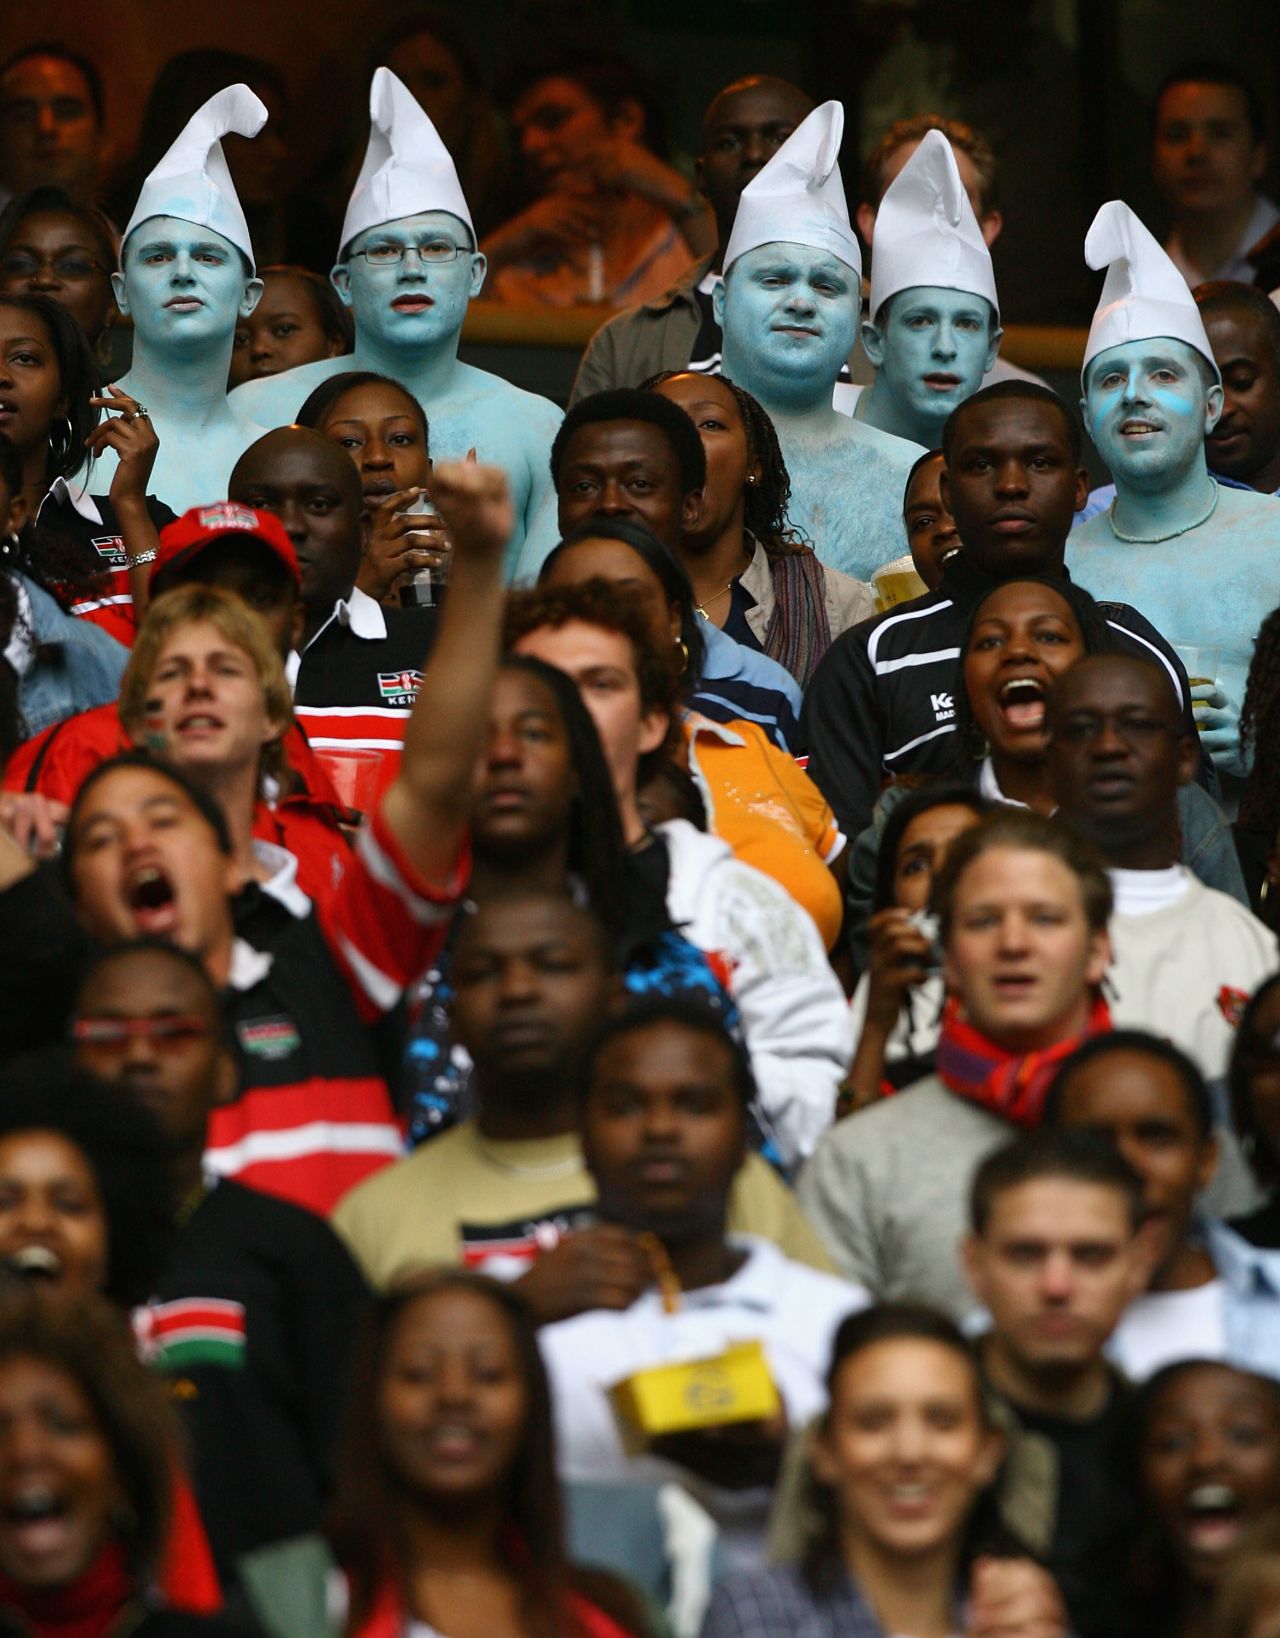 Smurf costumes can be seen at many UK sporting events.